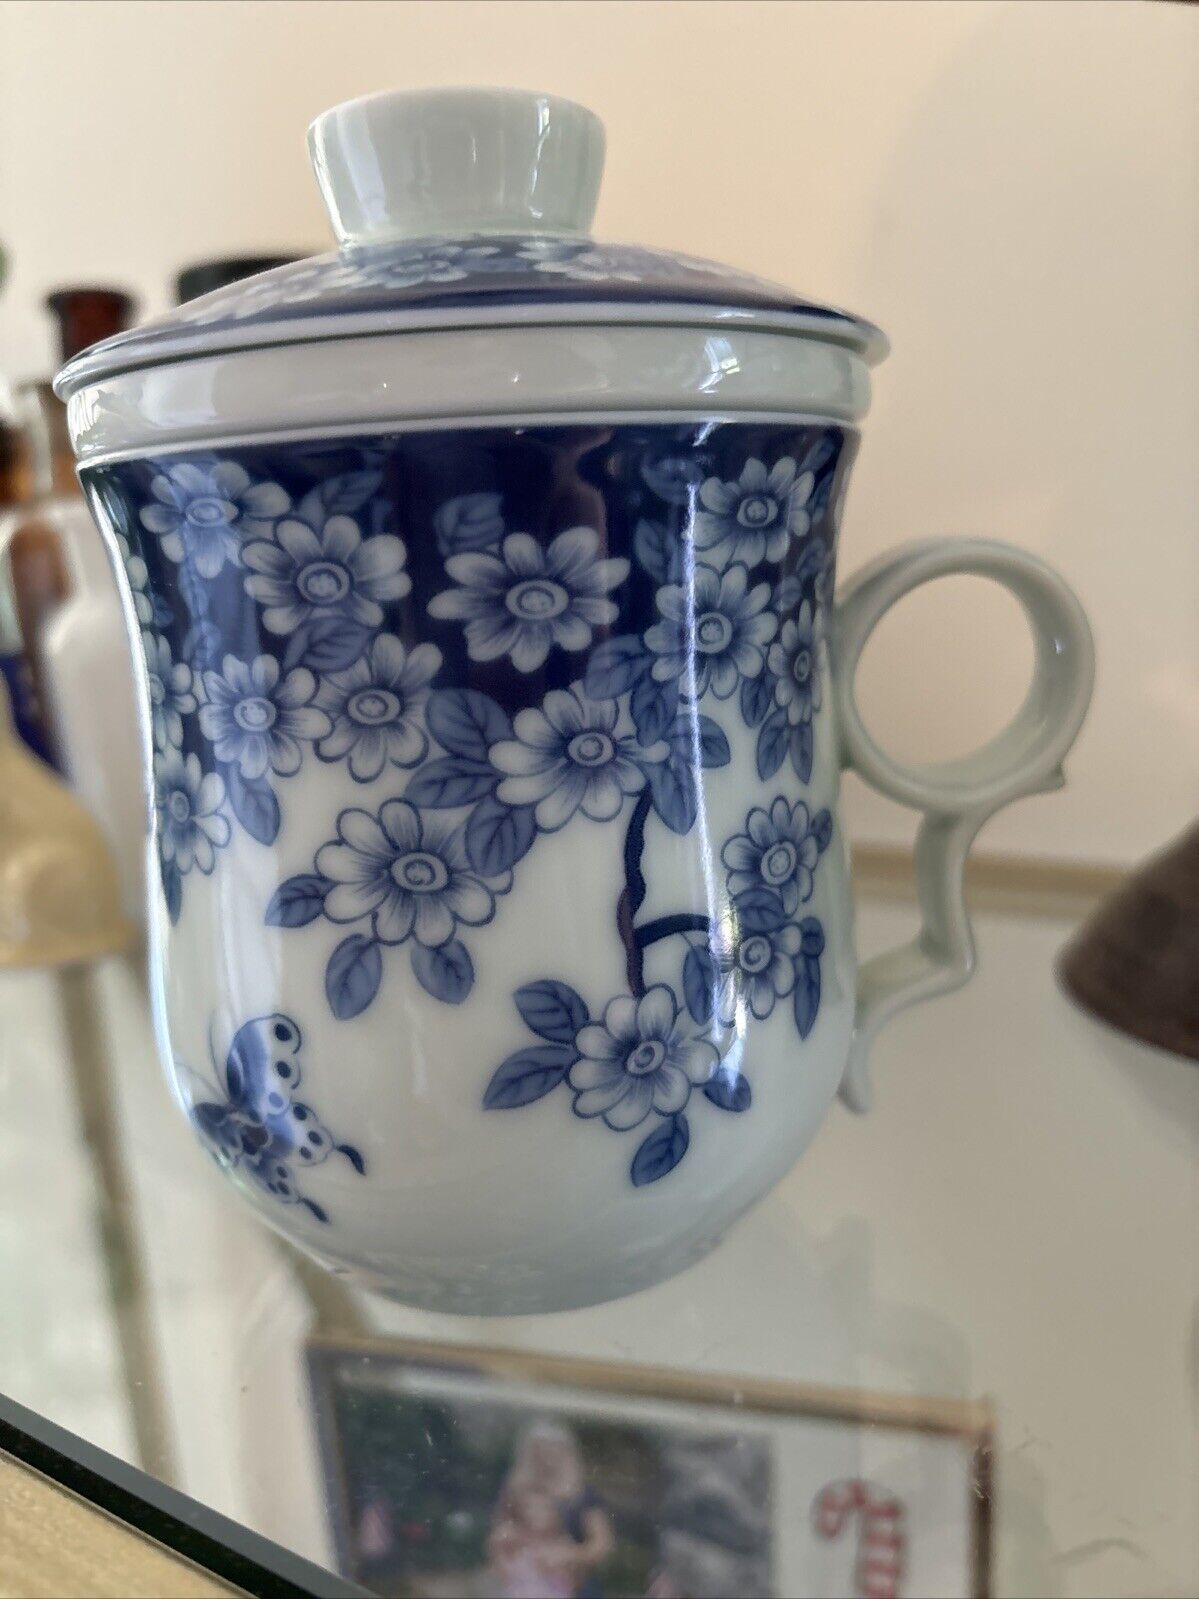 Porcelain Tea Cup with Infuser Lid - Chinese Jingdezhen Ceramics